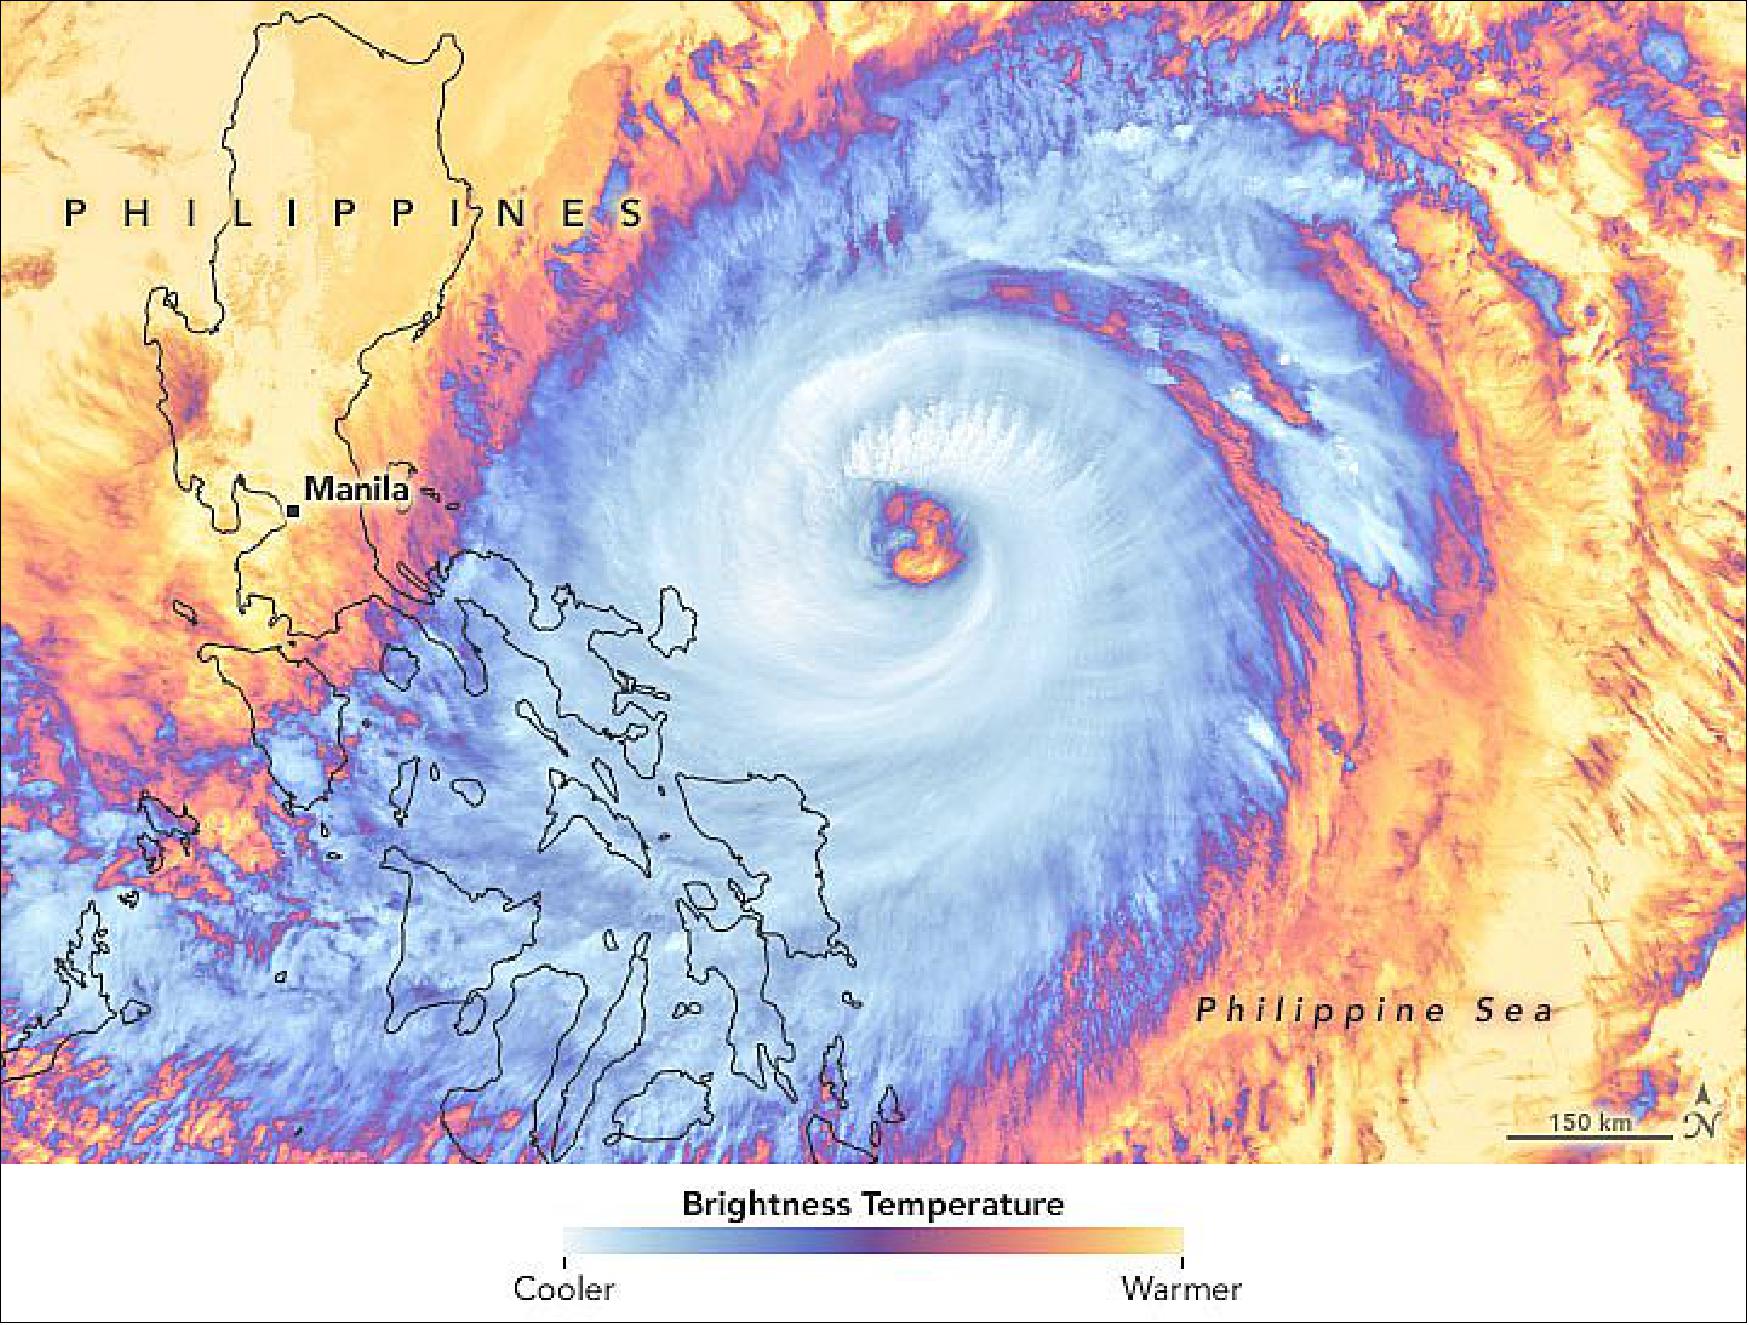 Figure 31: The super typhoon reached extreme intensity earlier in the year than any storm in the satellite era. This infrared satellite image was acquired around midday on April 19 with the Visible Infrared Imaging Radiometer Suite (VIIRS) on NOAA-20. Surigae’s clouds are shown using brightness temperature data, which is useful for distinguishing cooler cloud structures from the warmer surface below. Around that time the JTWC reported the typhoon had sustained winds of 120 knots (140 miles/220 km/hr), [image credit: NASA Earth Observatory images by Joshua Stevens, using VIIRS data from NASA EOSDIS LANCE, GIBS/Worldview and the Joint Polar Satellite System (JPSS). Story by Michael Carlowicz]